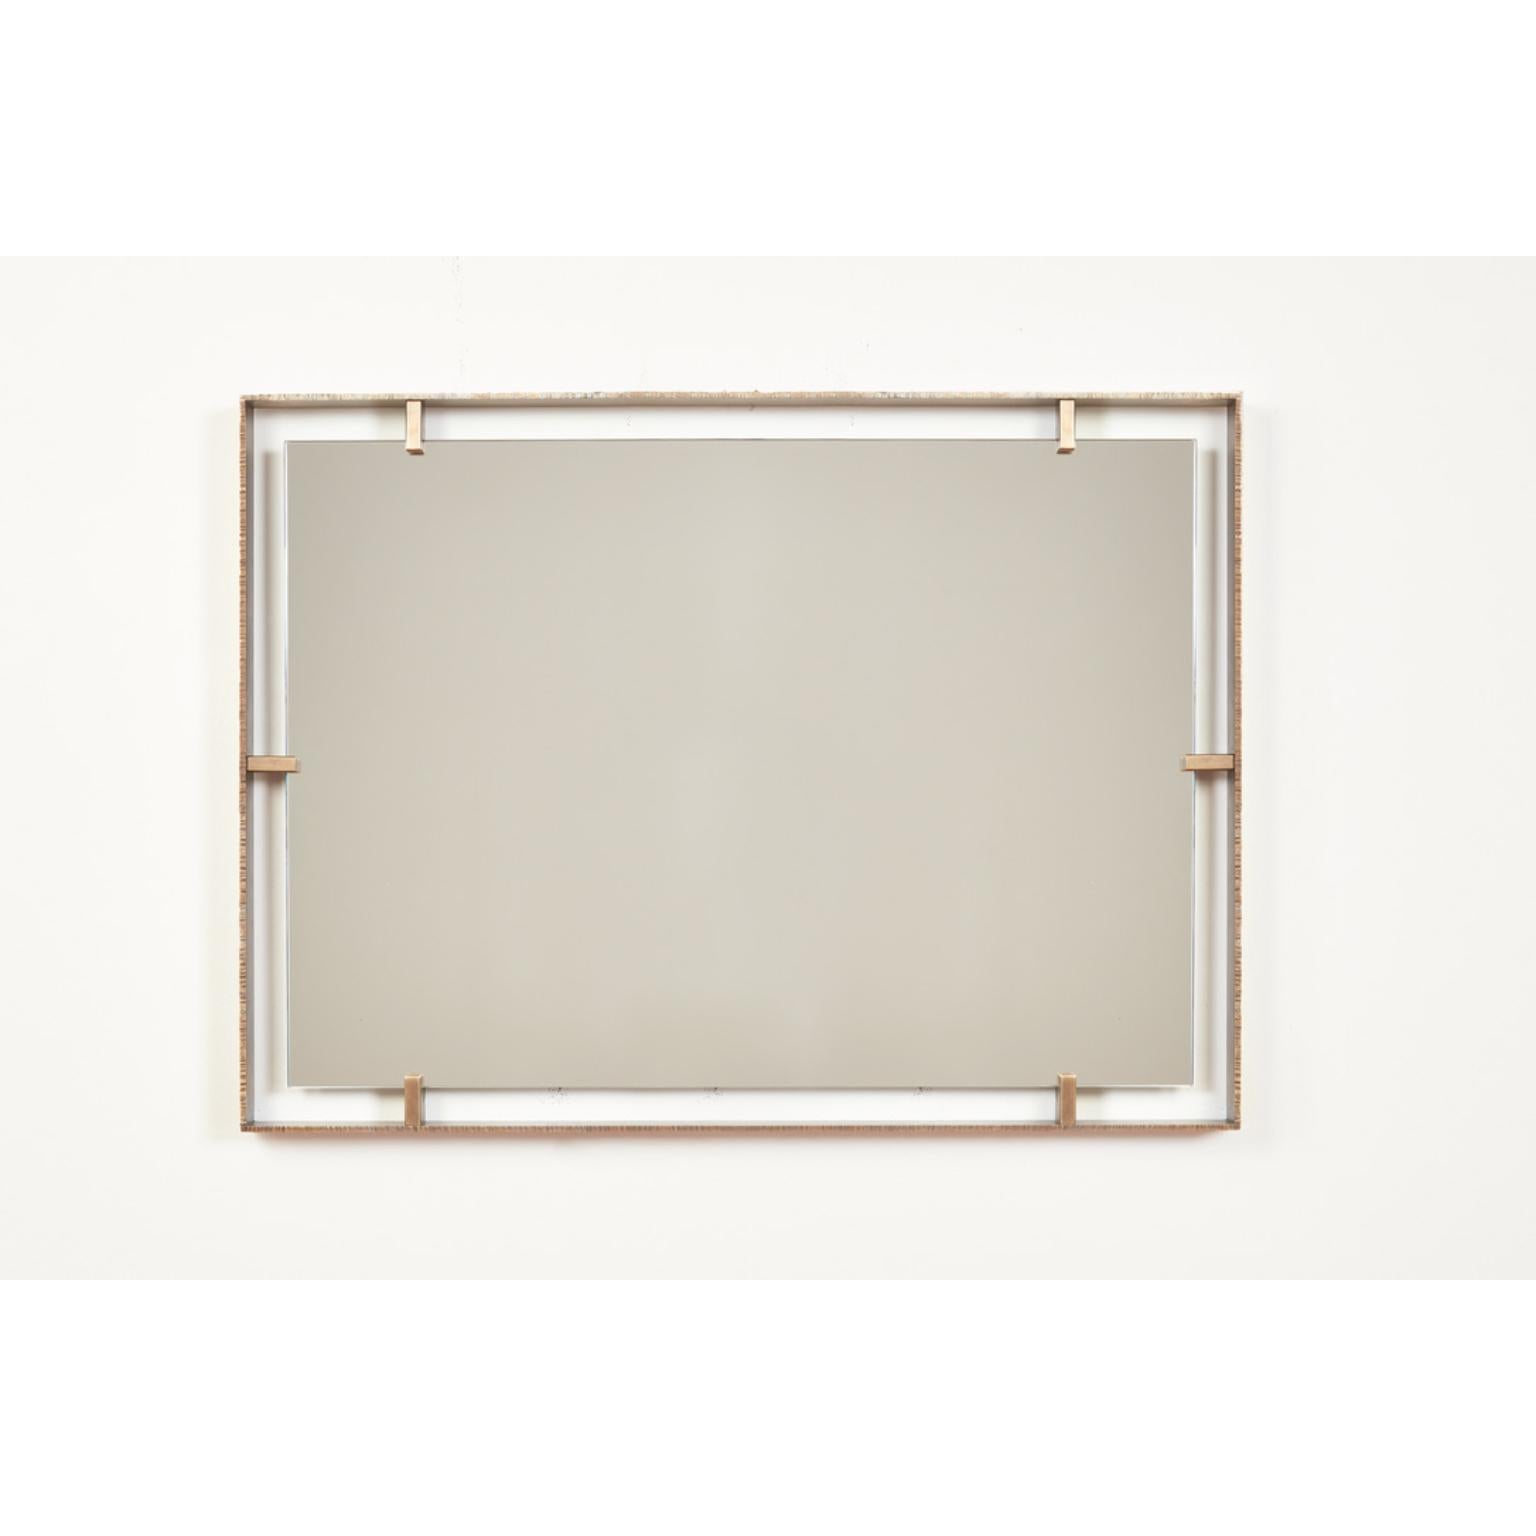 Rectangular Gauged Edge Mirror by William Emmerson
Dimensions: D 5,1 x W 106,7 x H 76,2 cm.
Materials: Brass and glass.
 
Introducing 